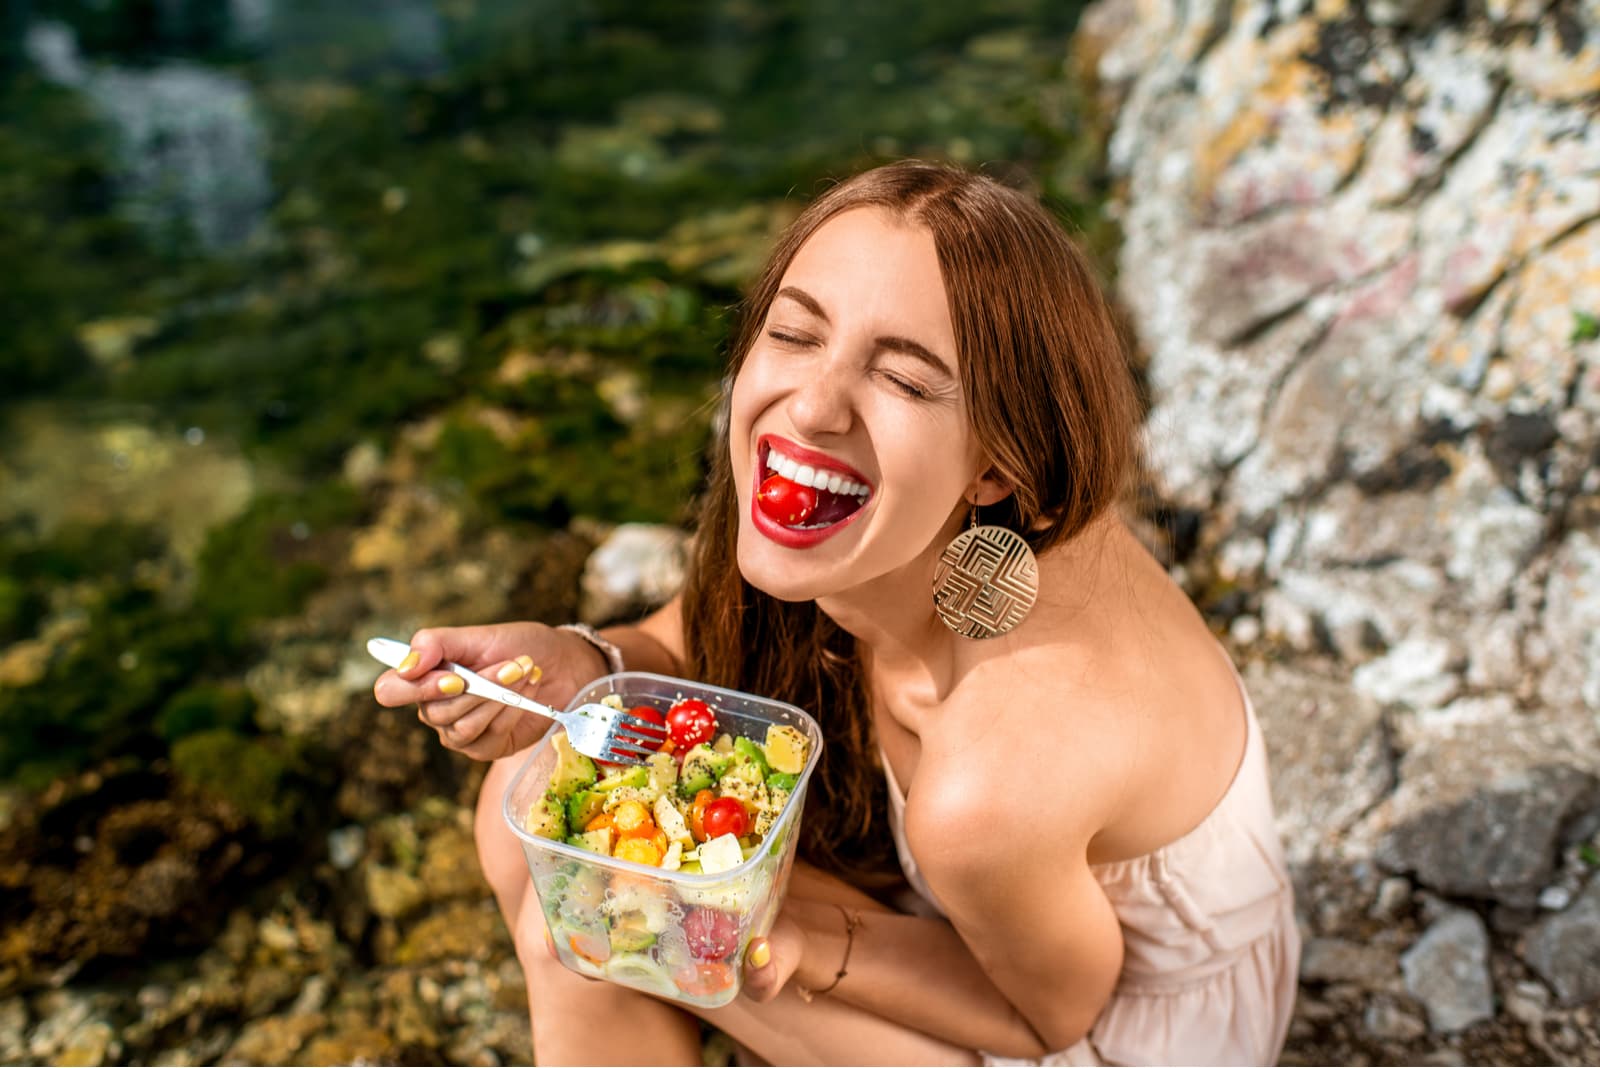 Woman eating healthy salad from plastic container